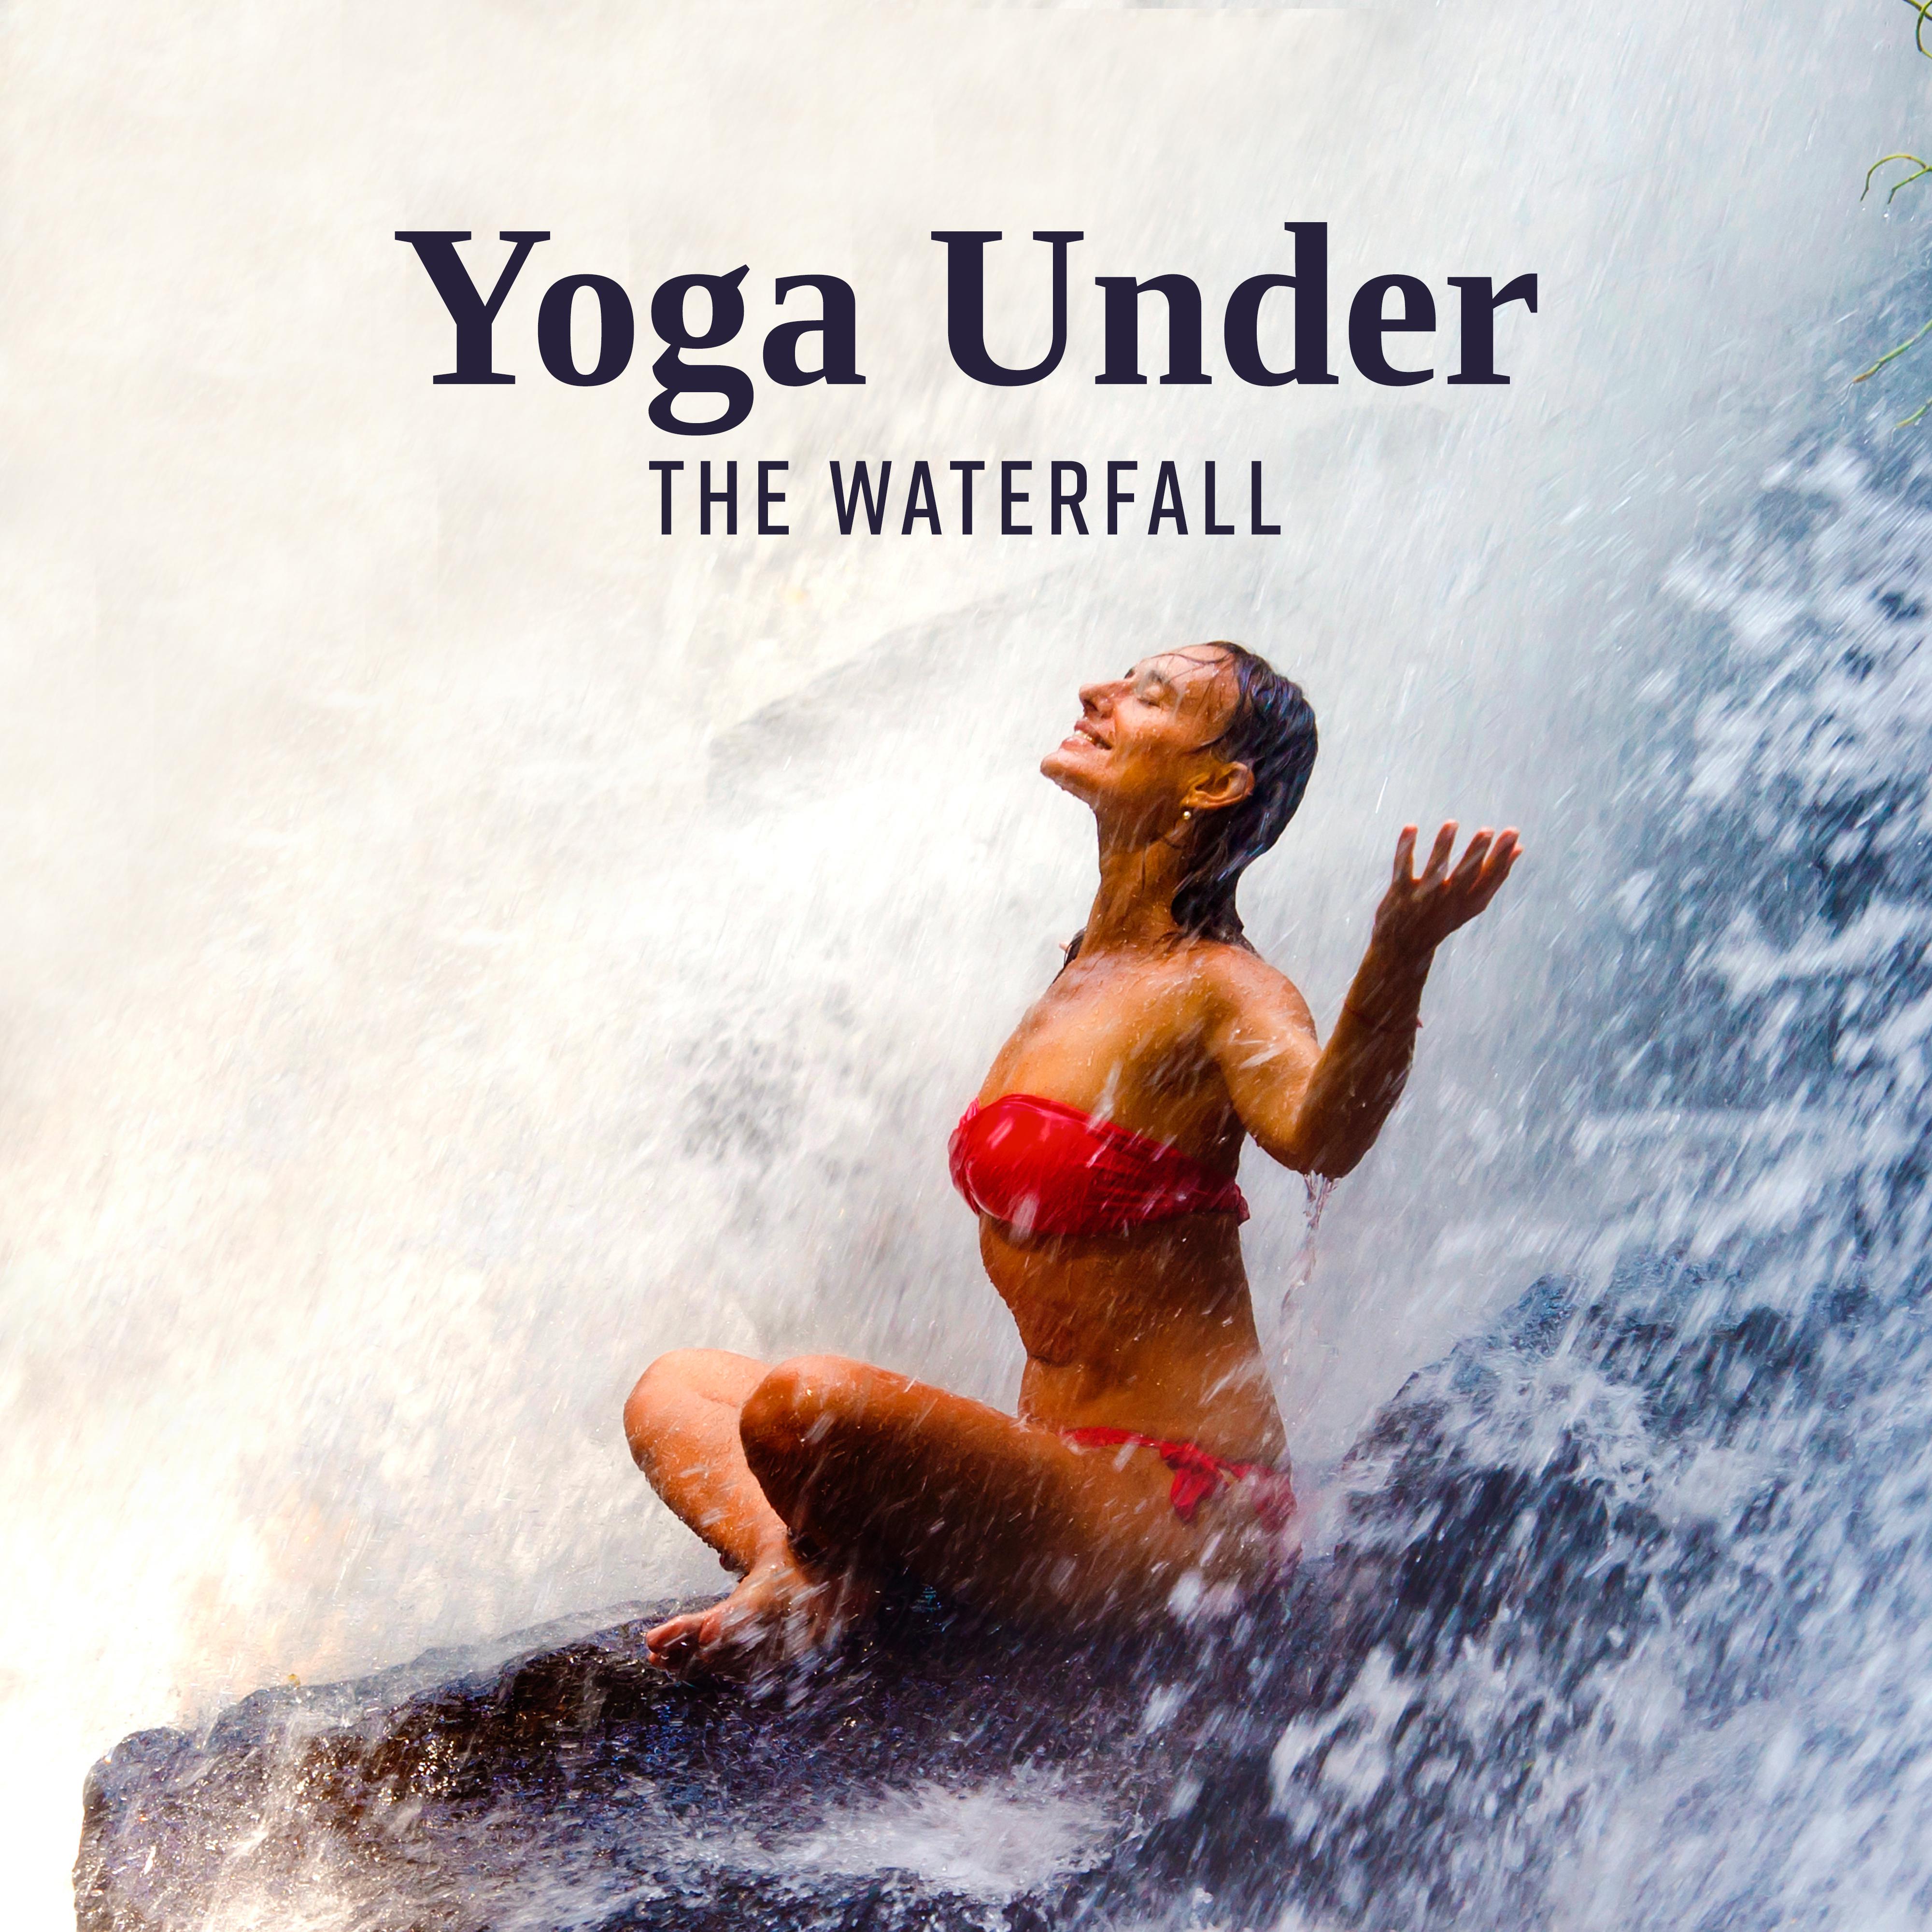 Yoga Under the Waterfall: 15 New Age Meditation Songs with Exotic Nature & Water Calming Sounds